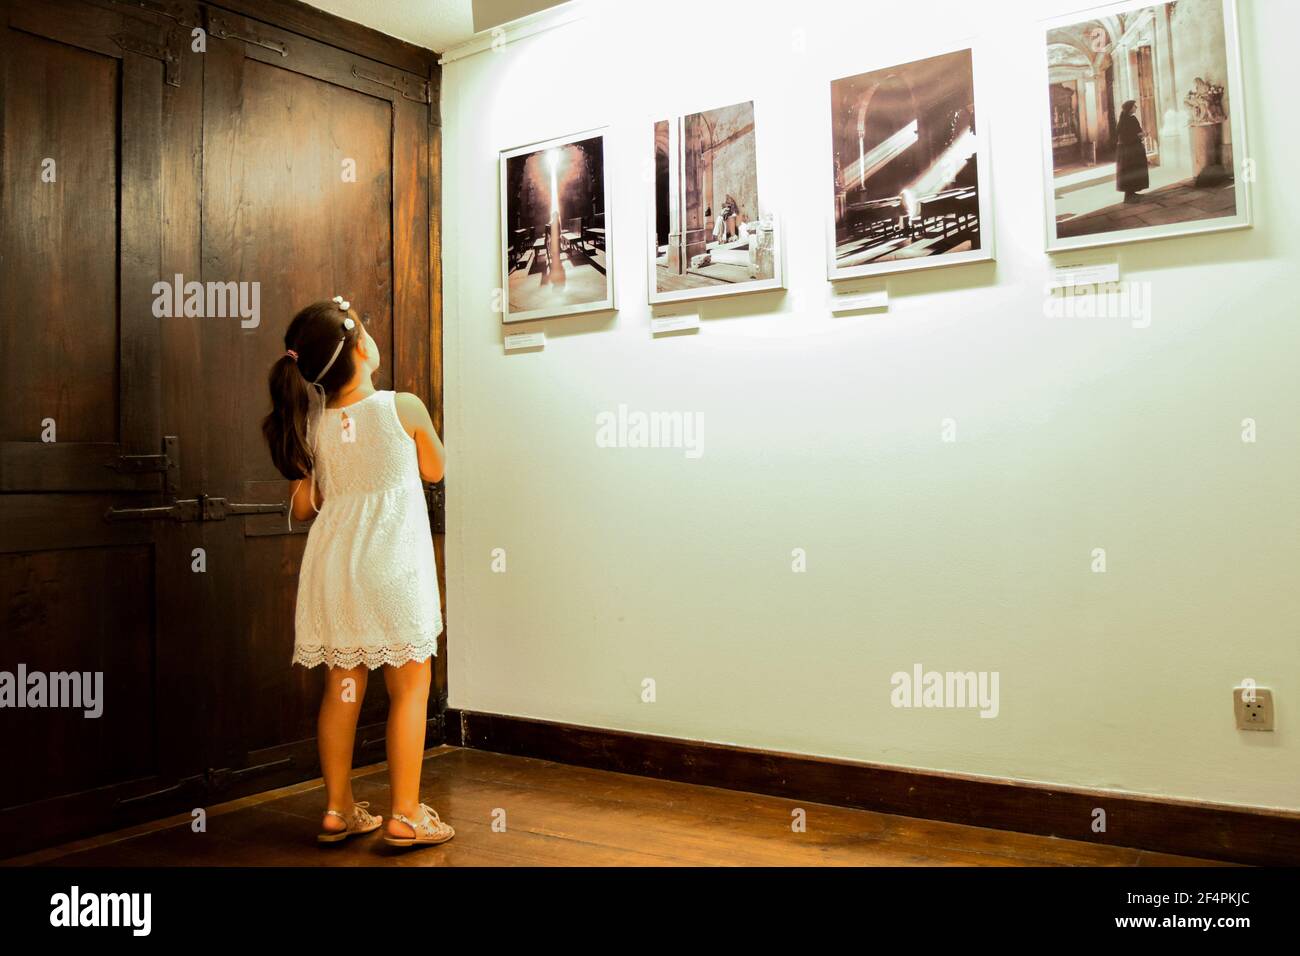 Little girl in white dress looking at historical photographs in museu exposition. Cultural learning, old and new interactions. History education. Stock Photo